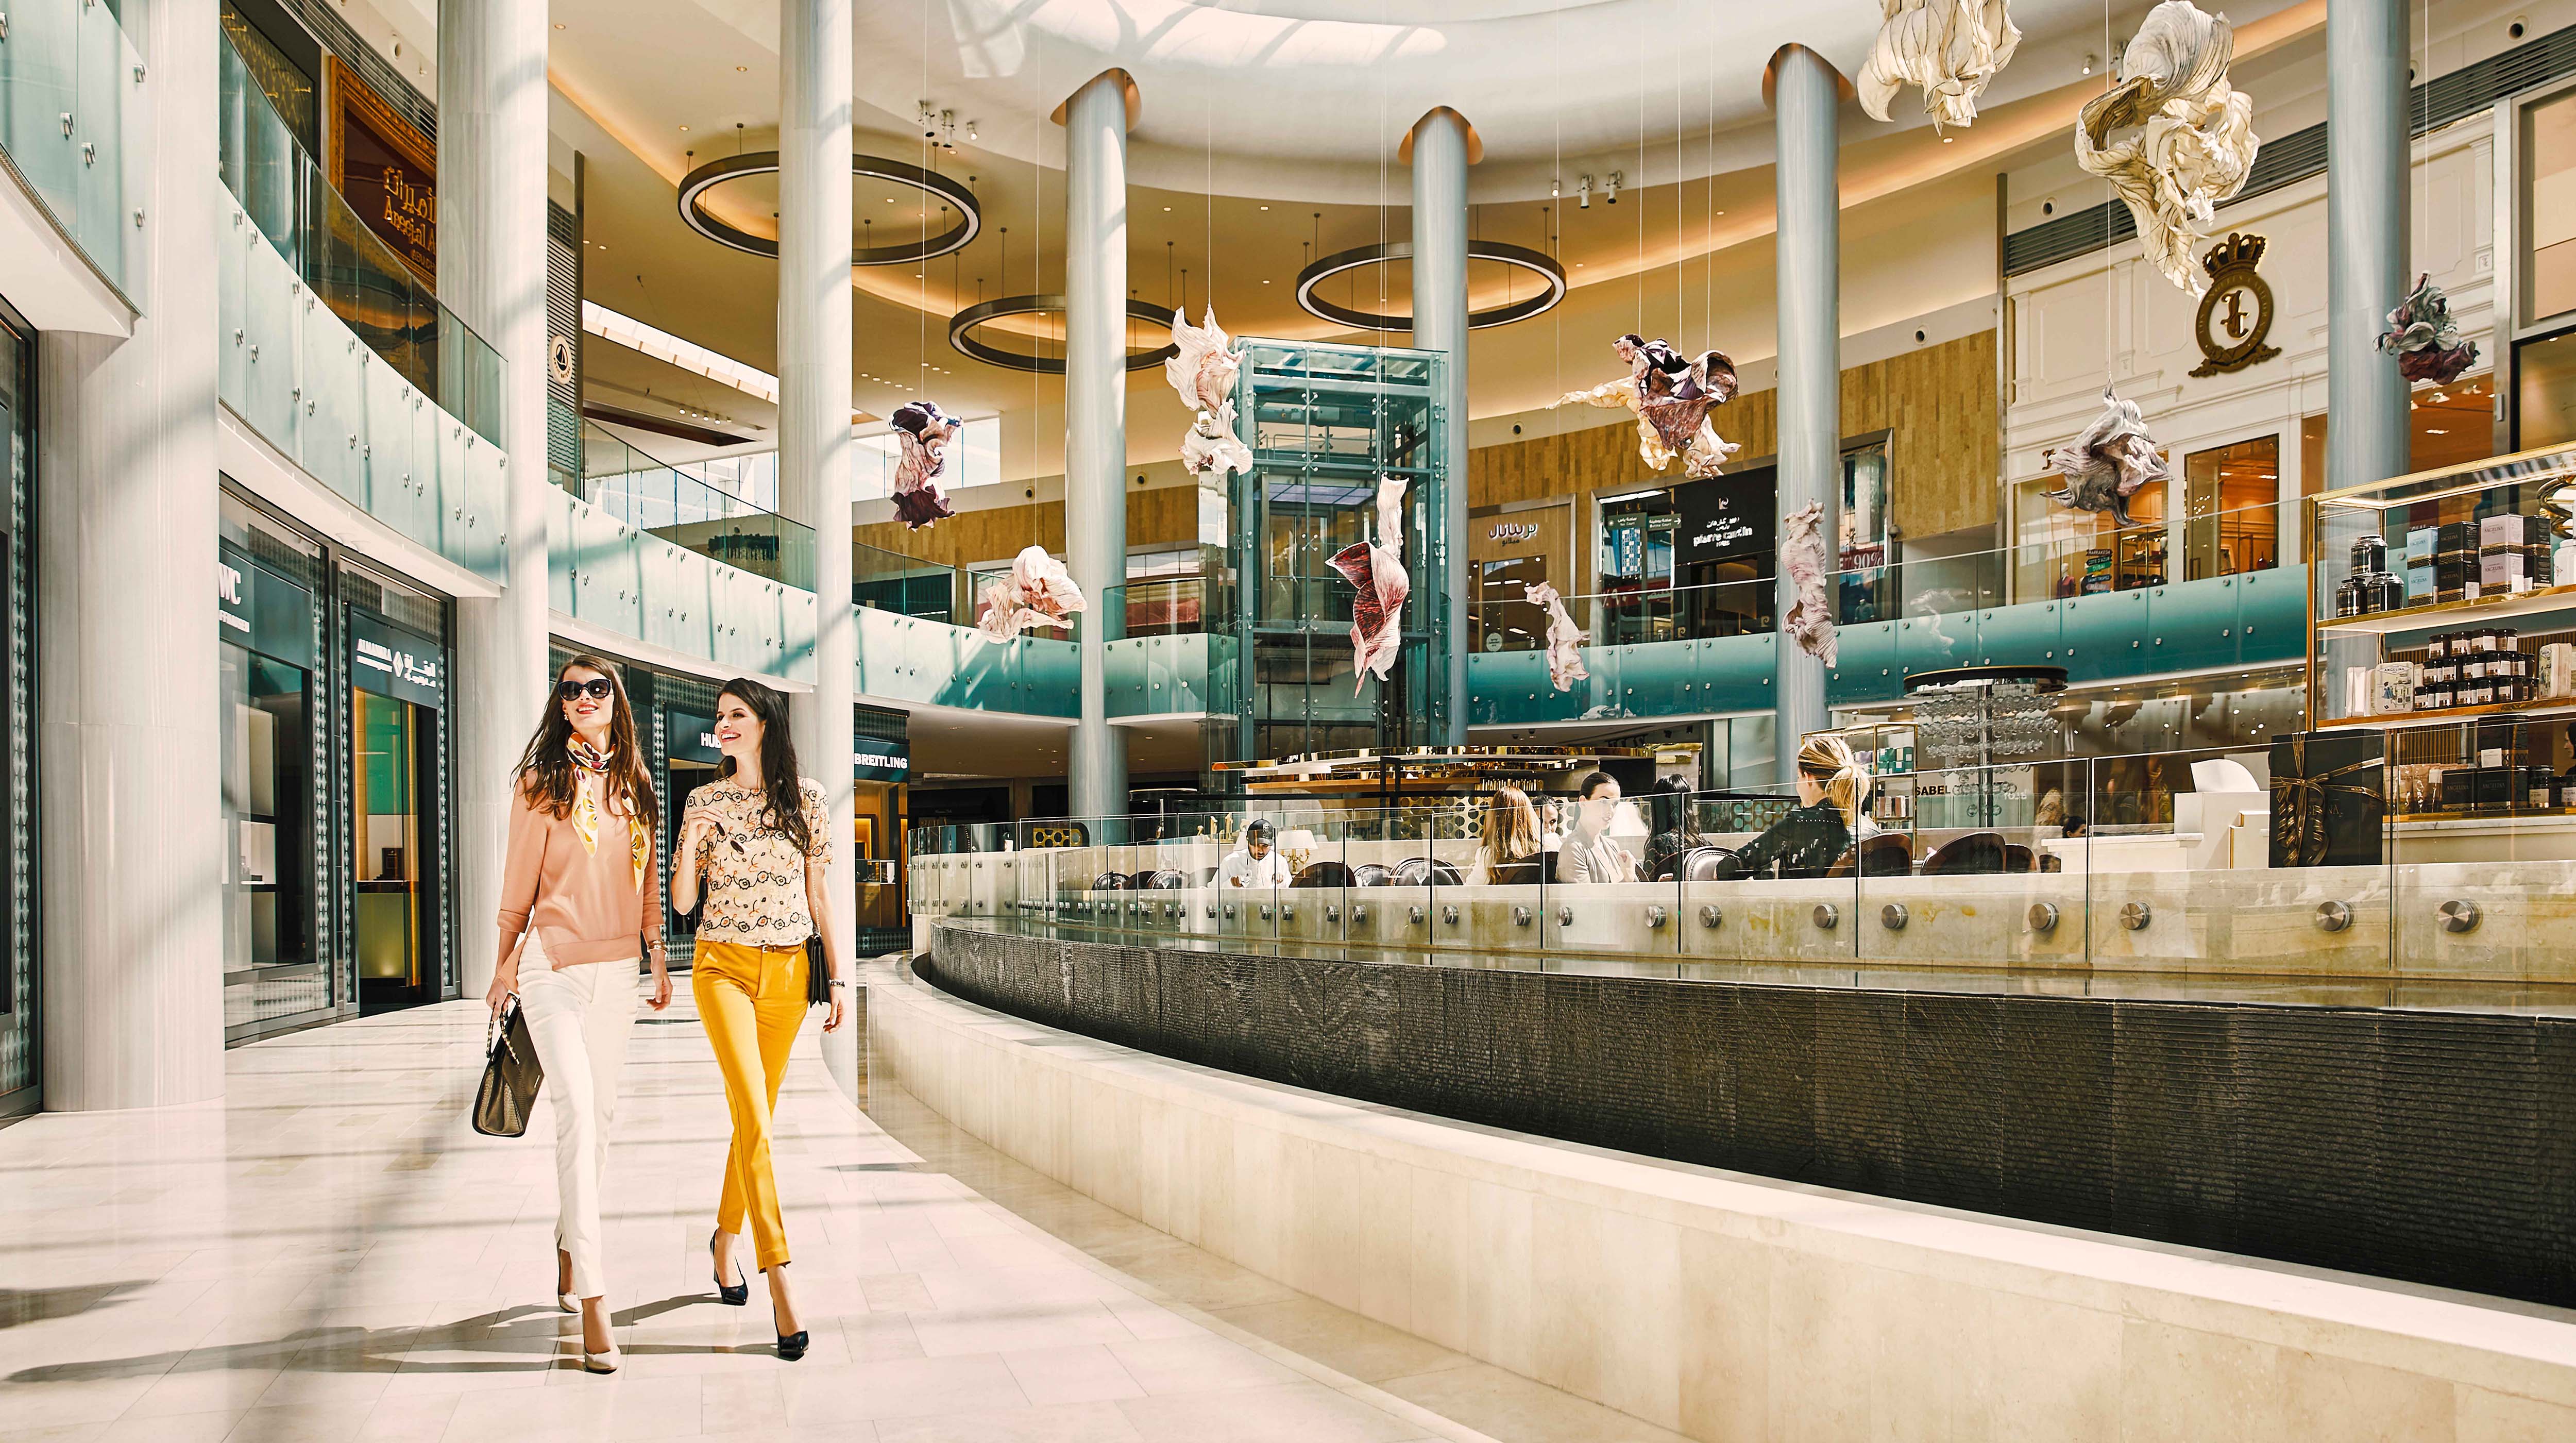 Two ladies chatting as they shop in one of Abu Dhabi's malls